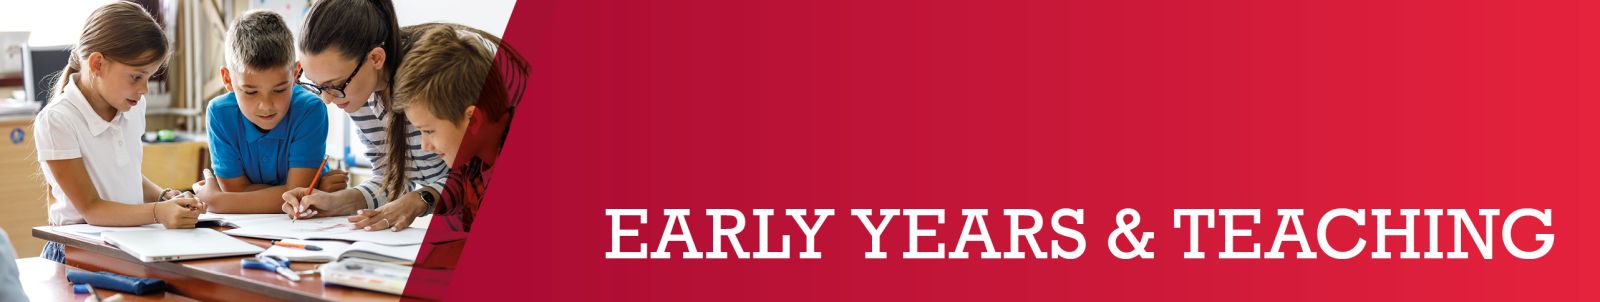 Banner image - Early Years & Teaching